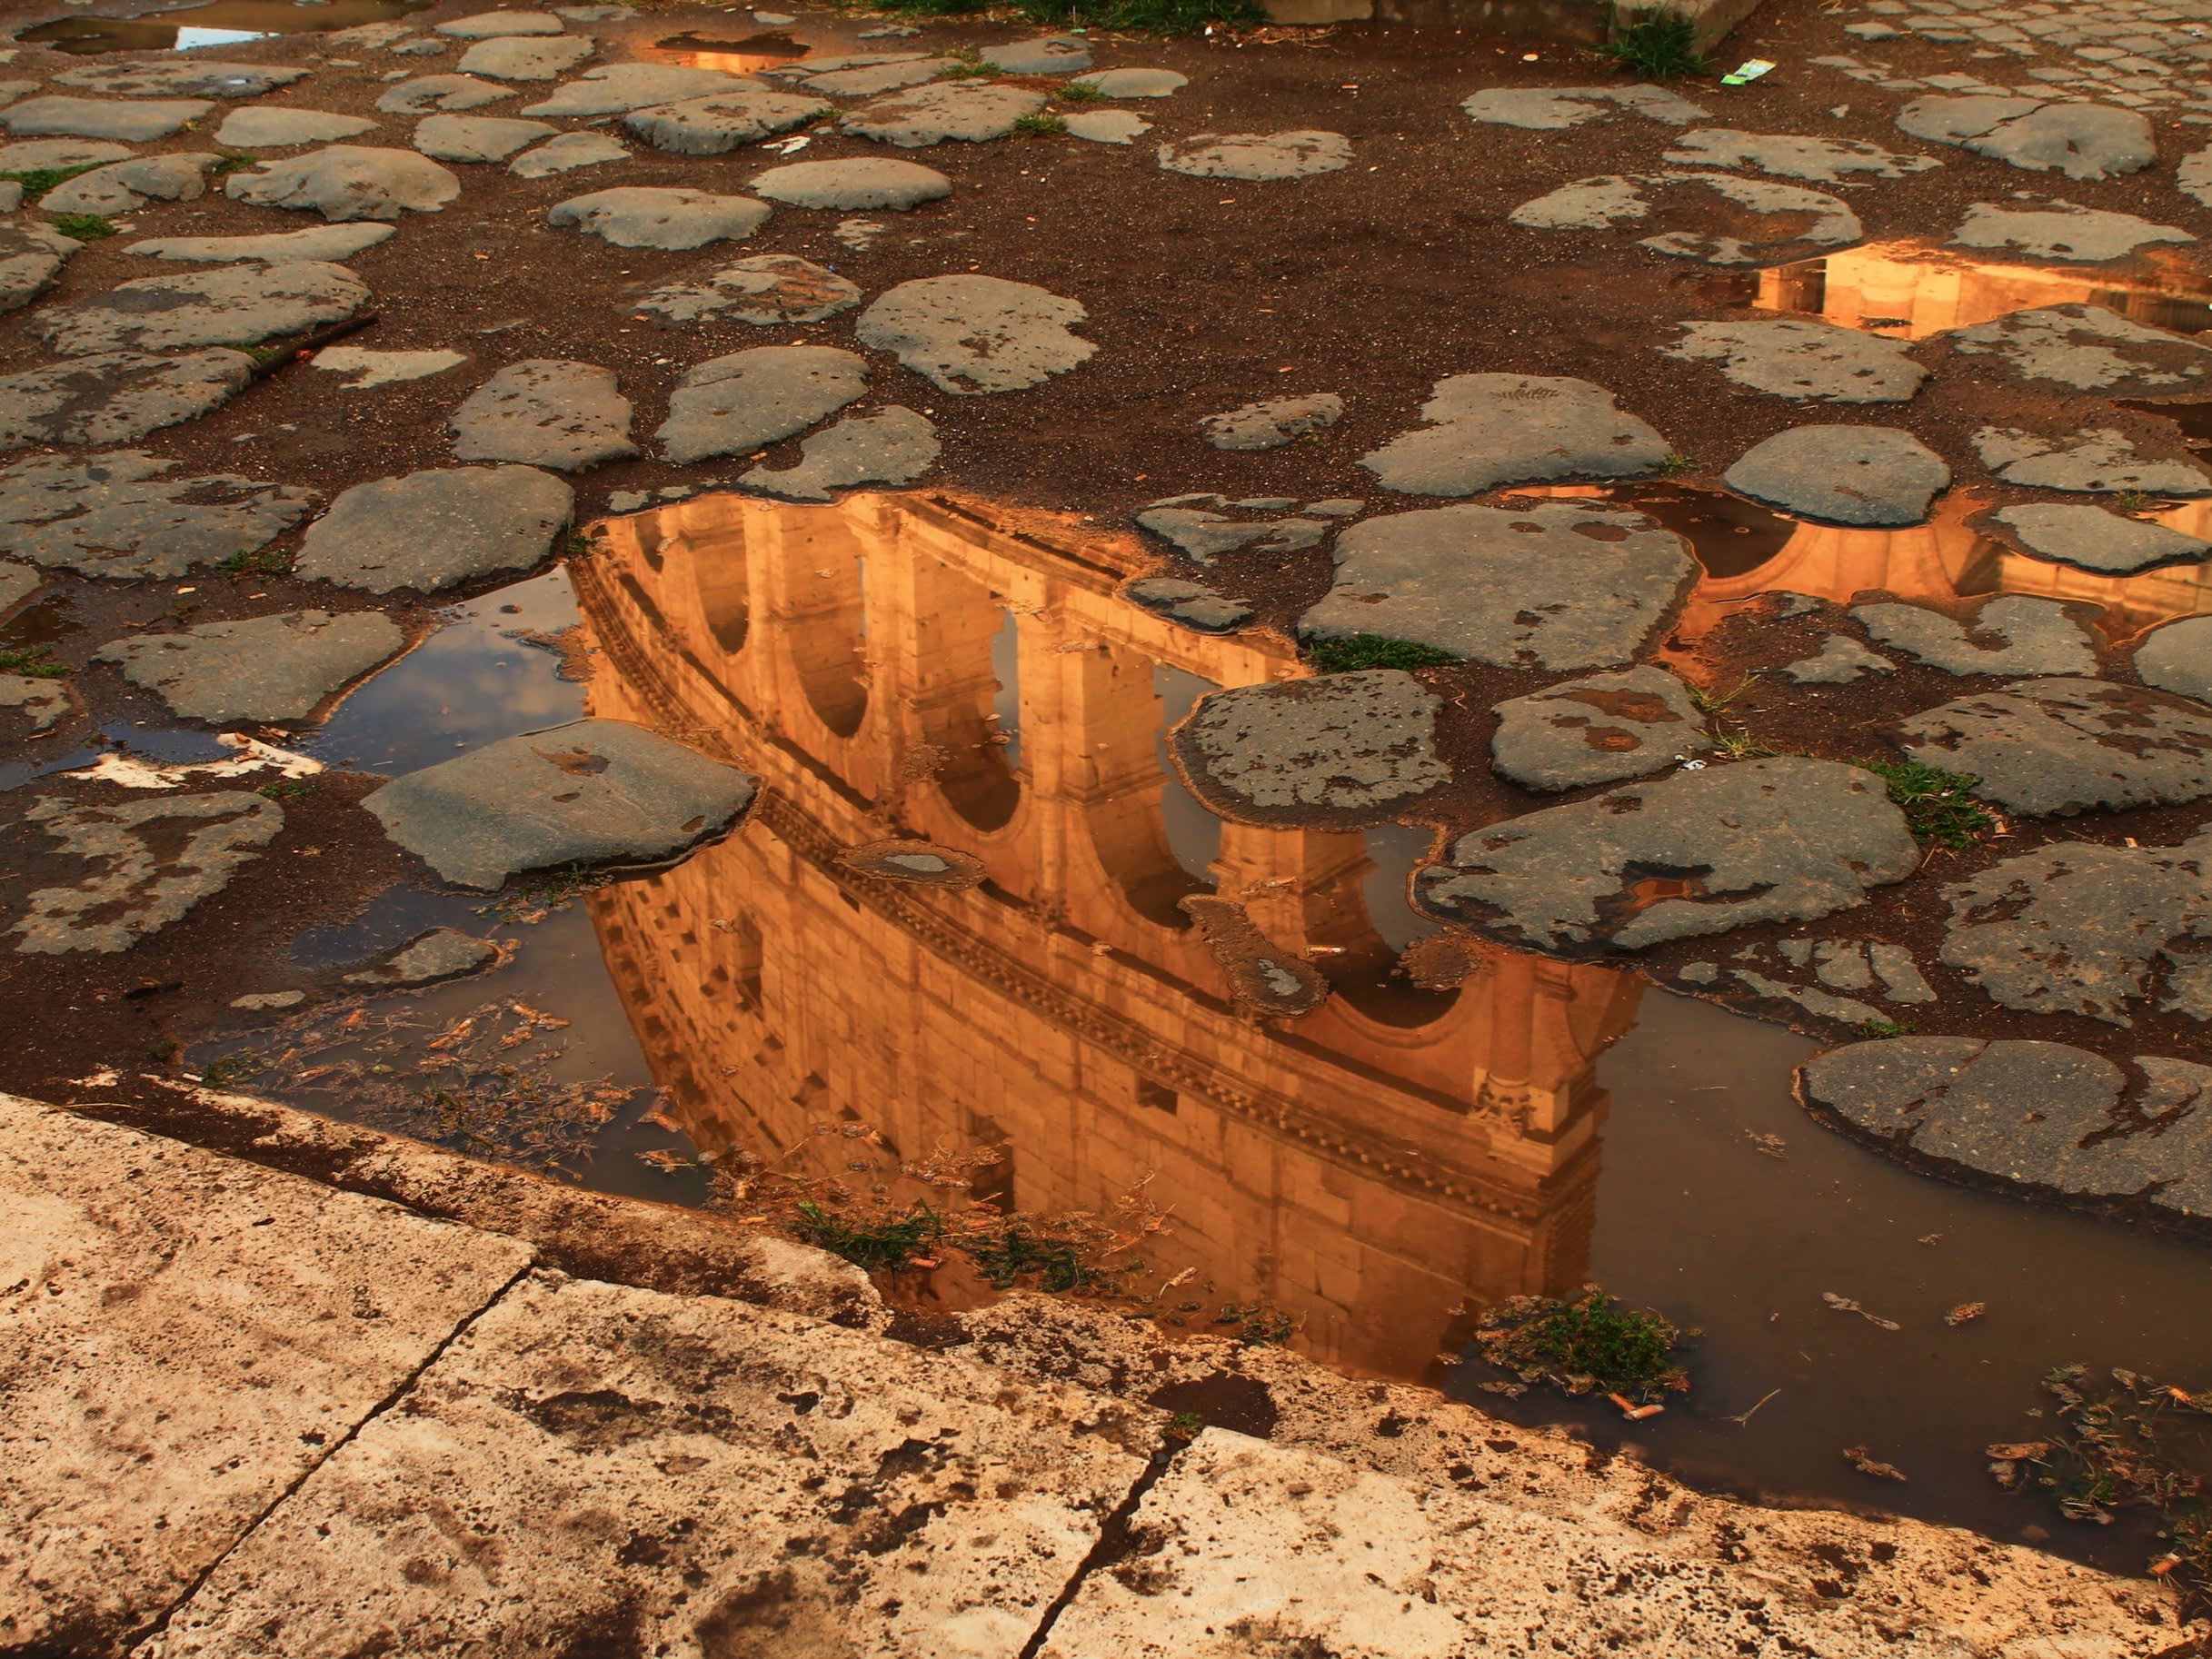 reflection of the Colosseum in a puddle